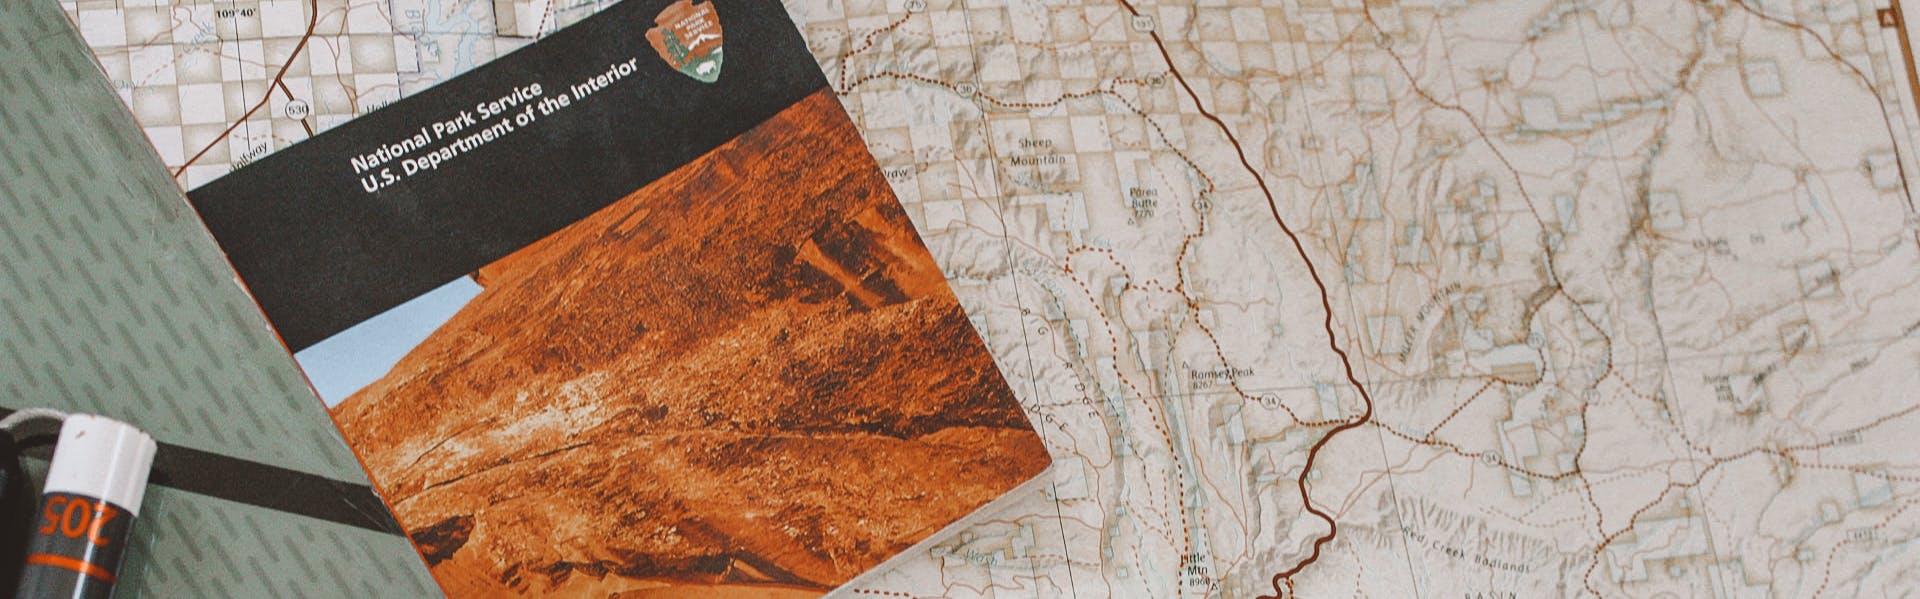 A close up of a map and a national parks brochure with a ski and a probe in the corner.